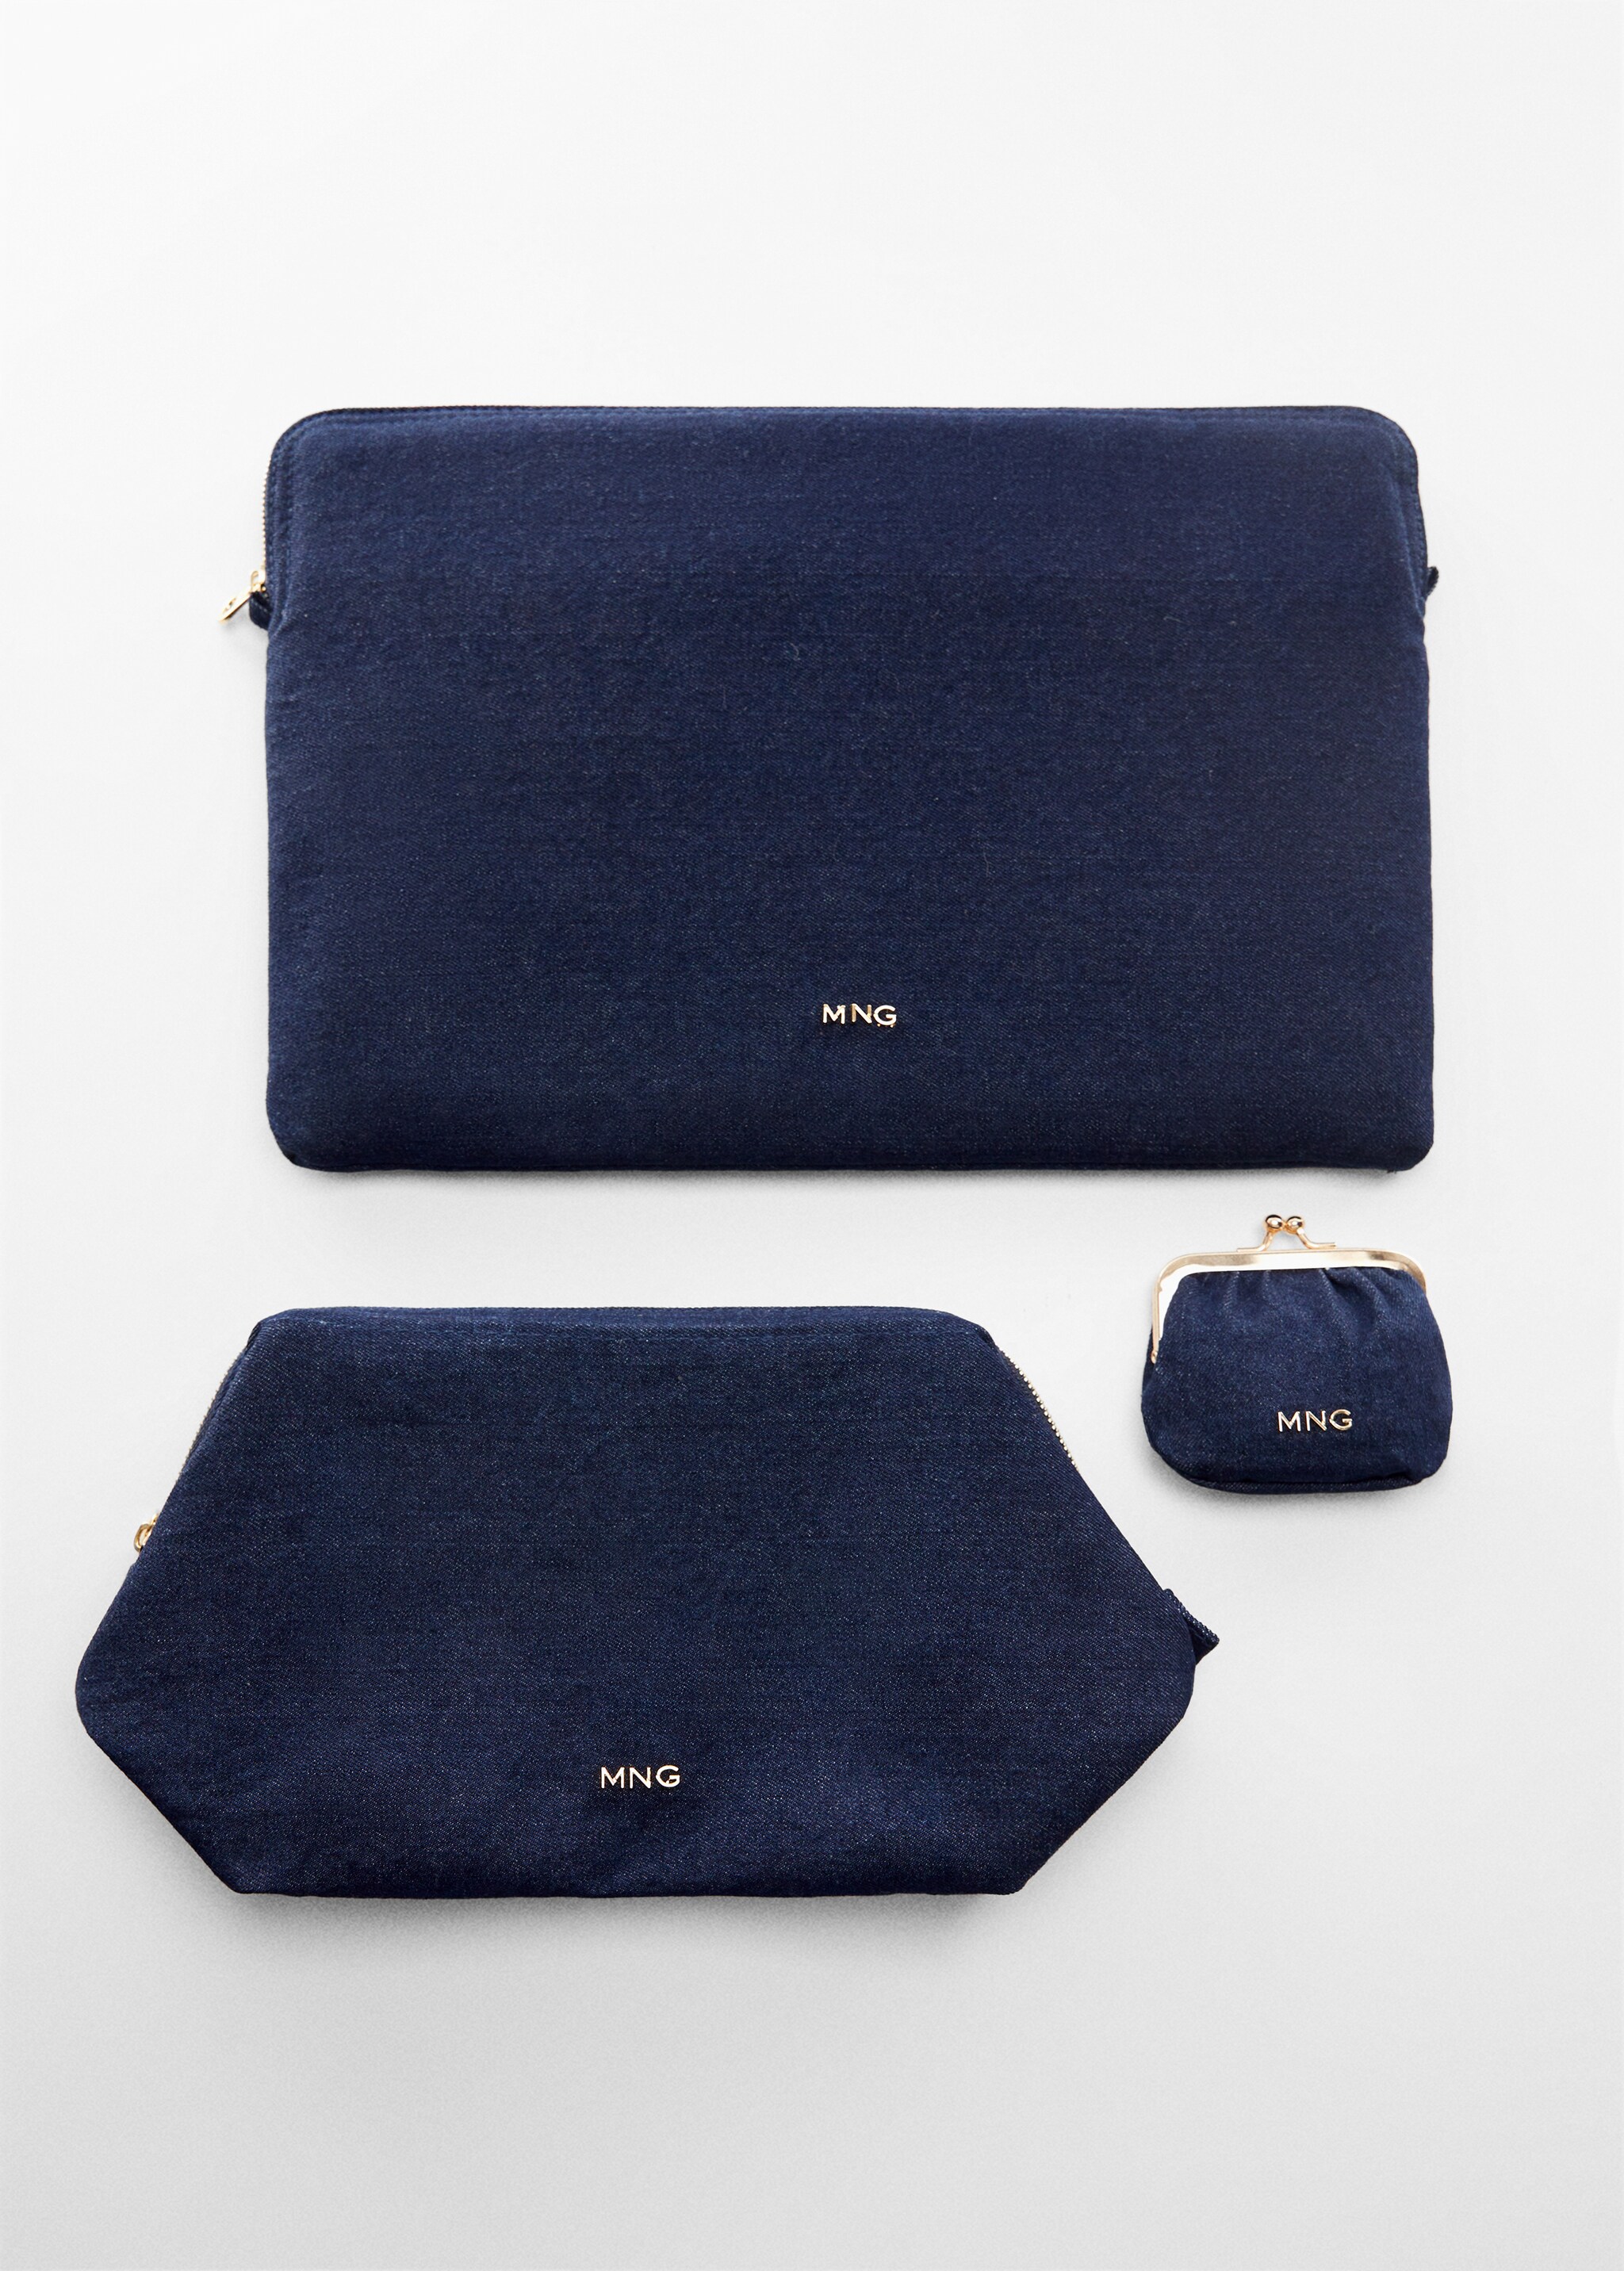 Denim toiletry bag - Details of the article 5